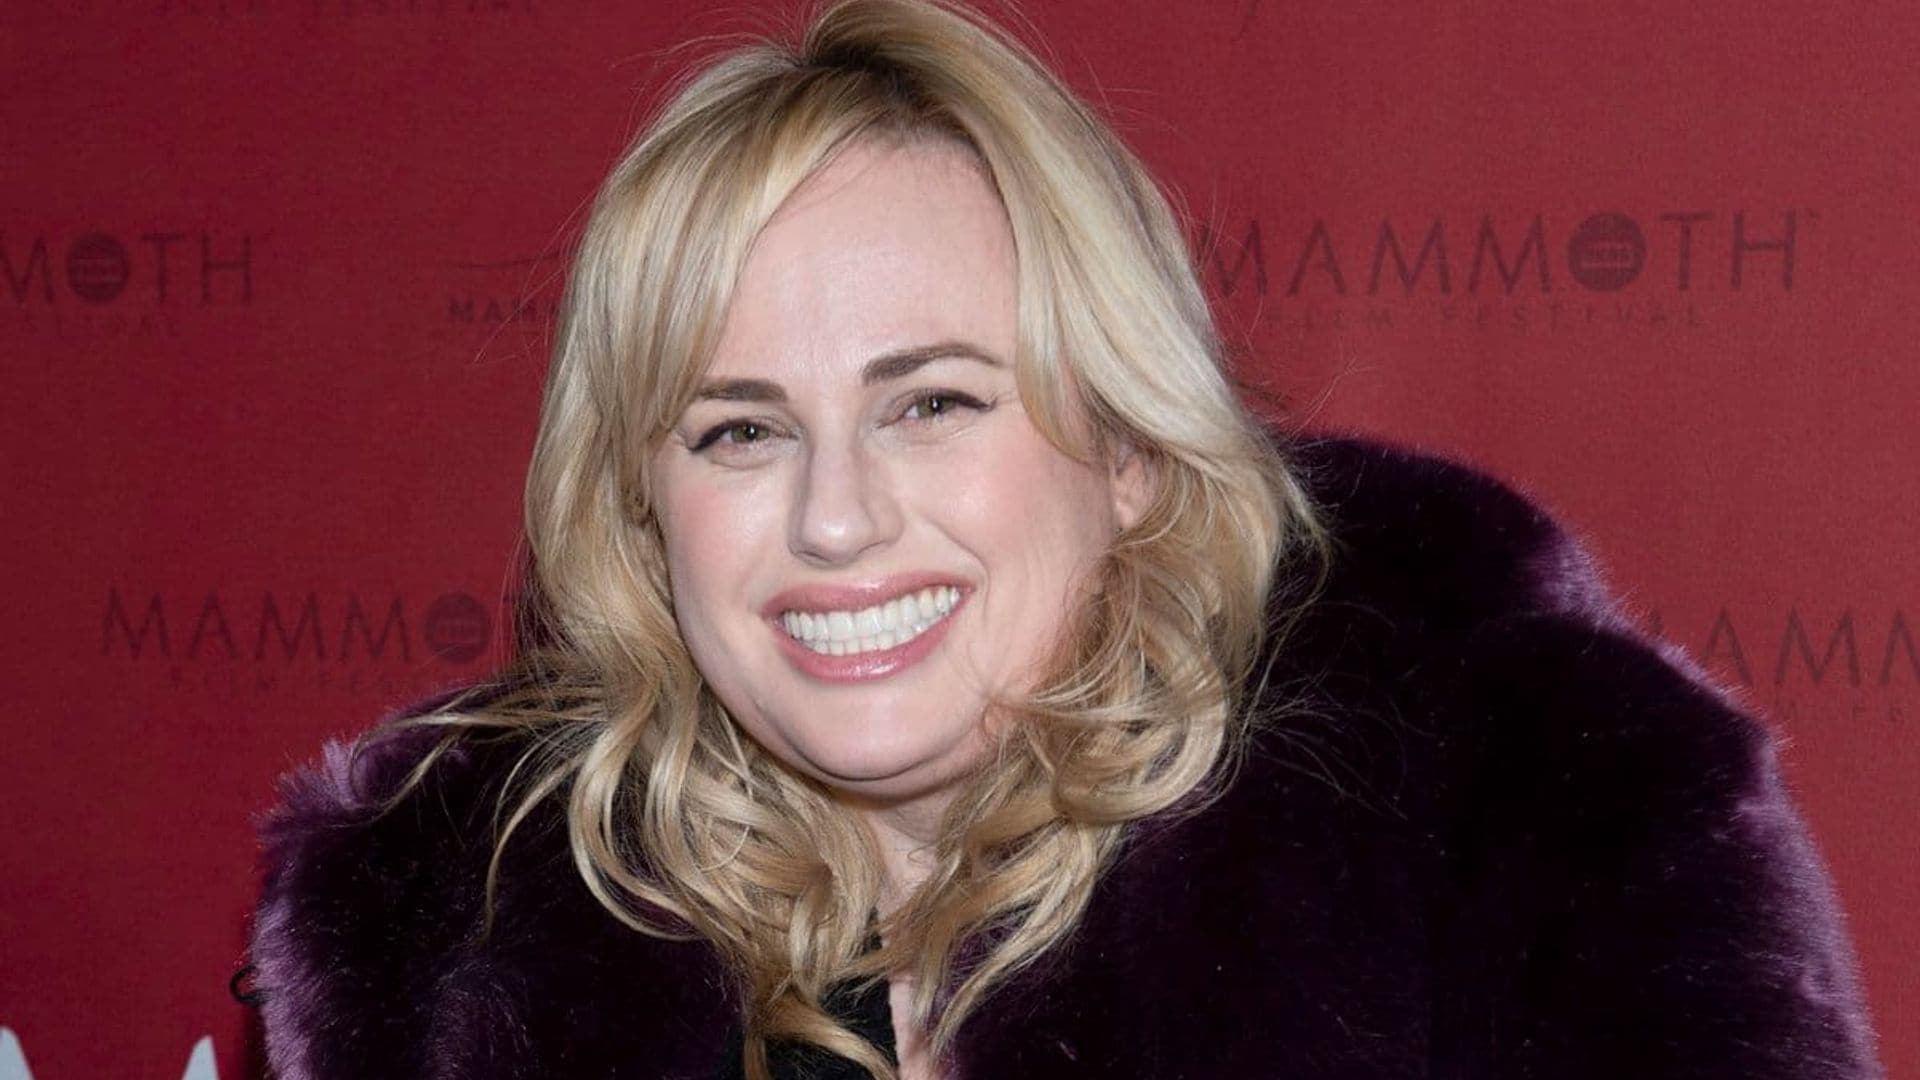 Rebel Wilson reveals she was eating this many calories every day before making a lifestyle change